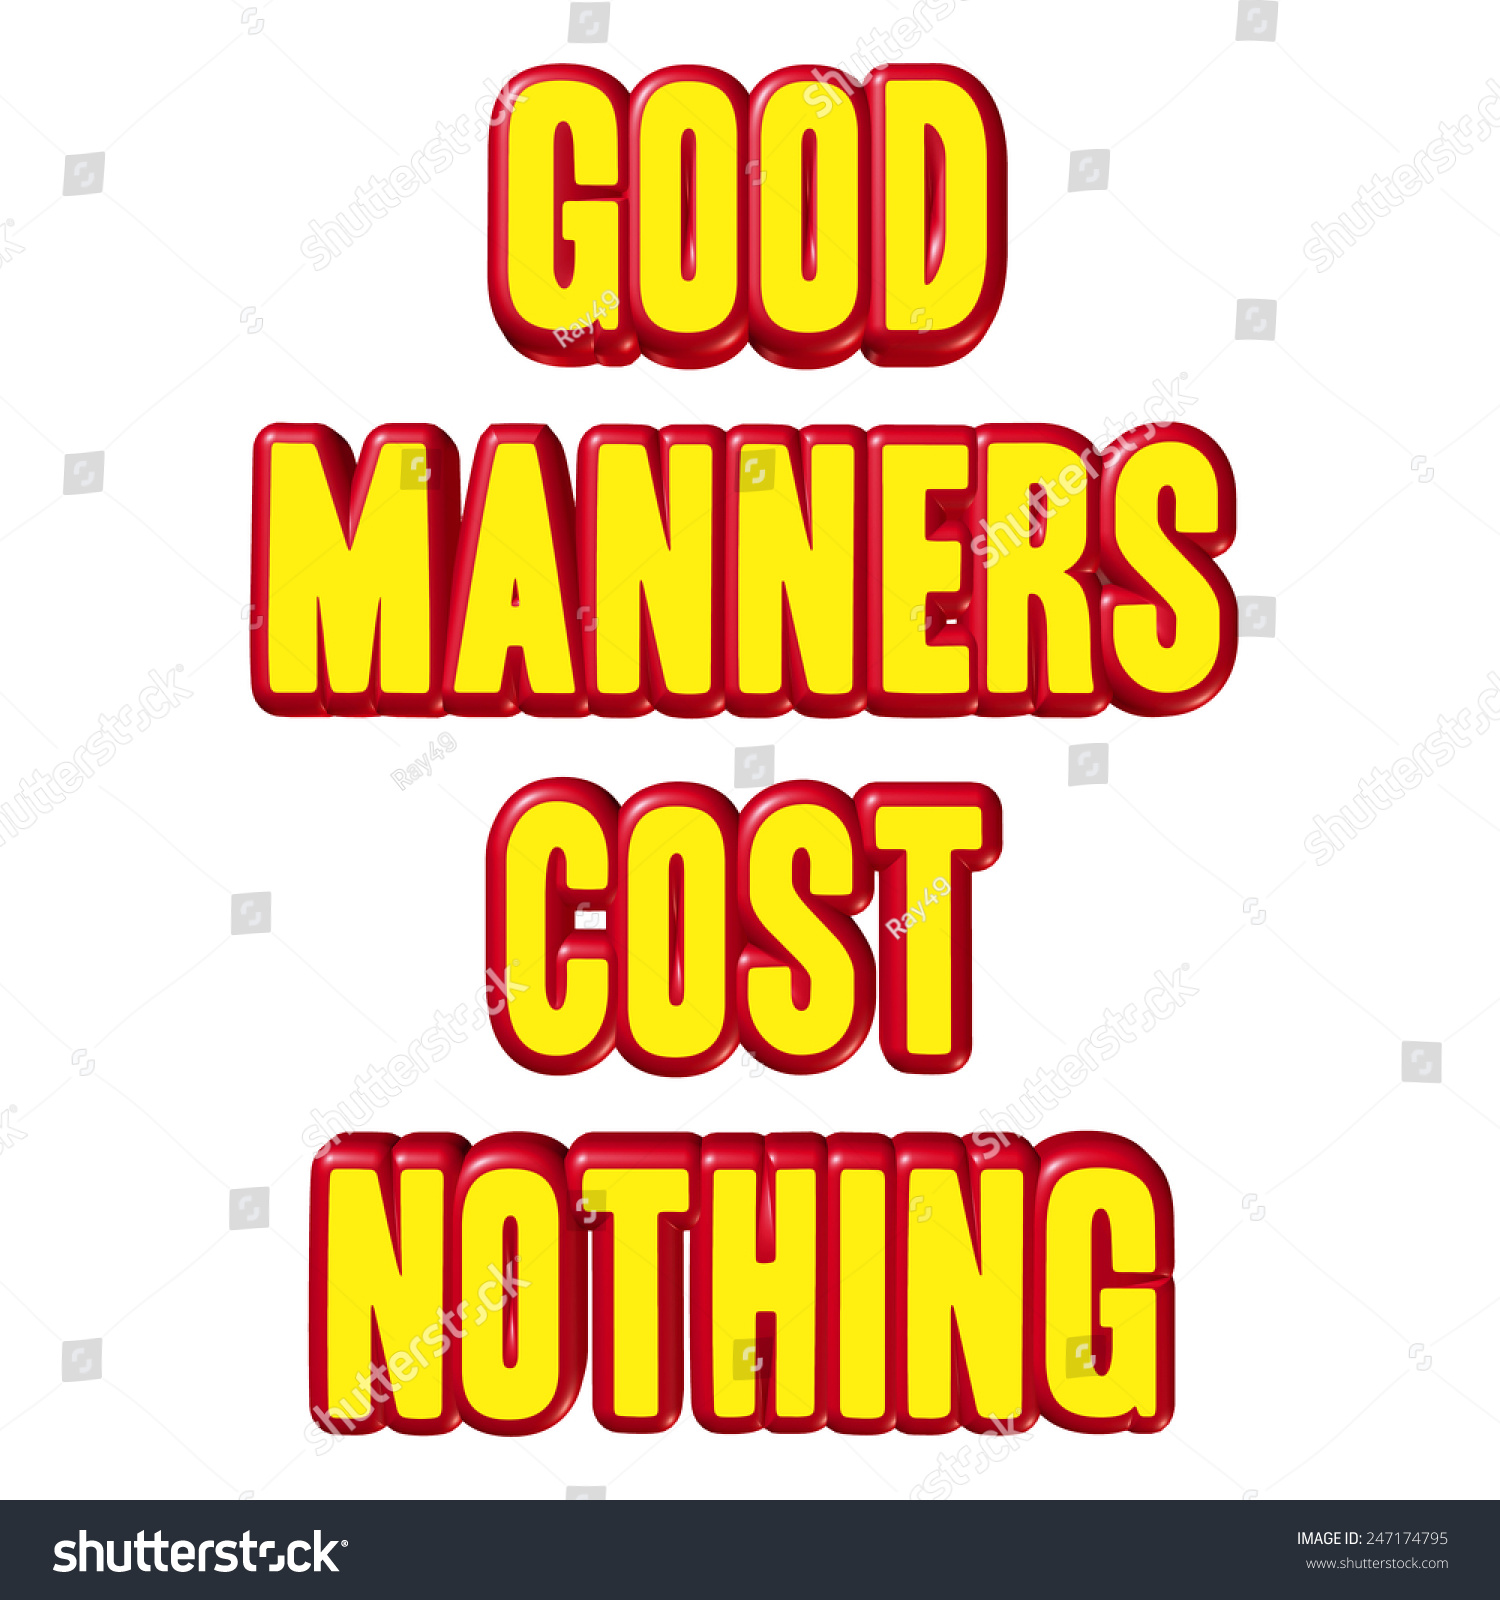 clip art for good manners - photo #28